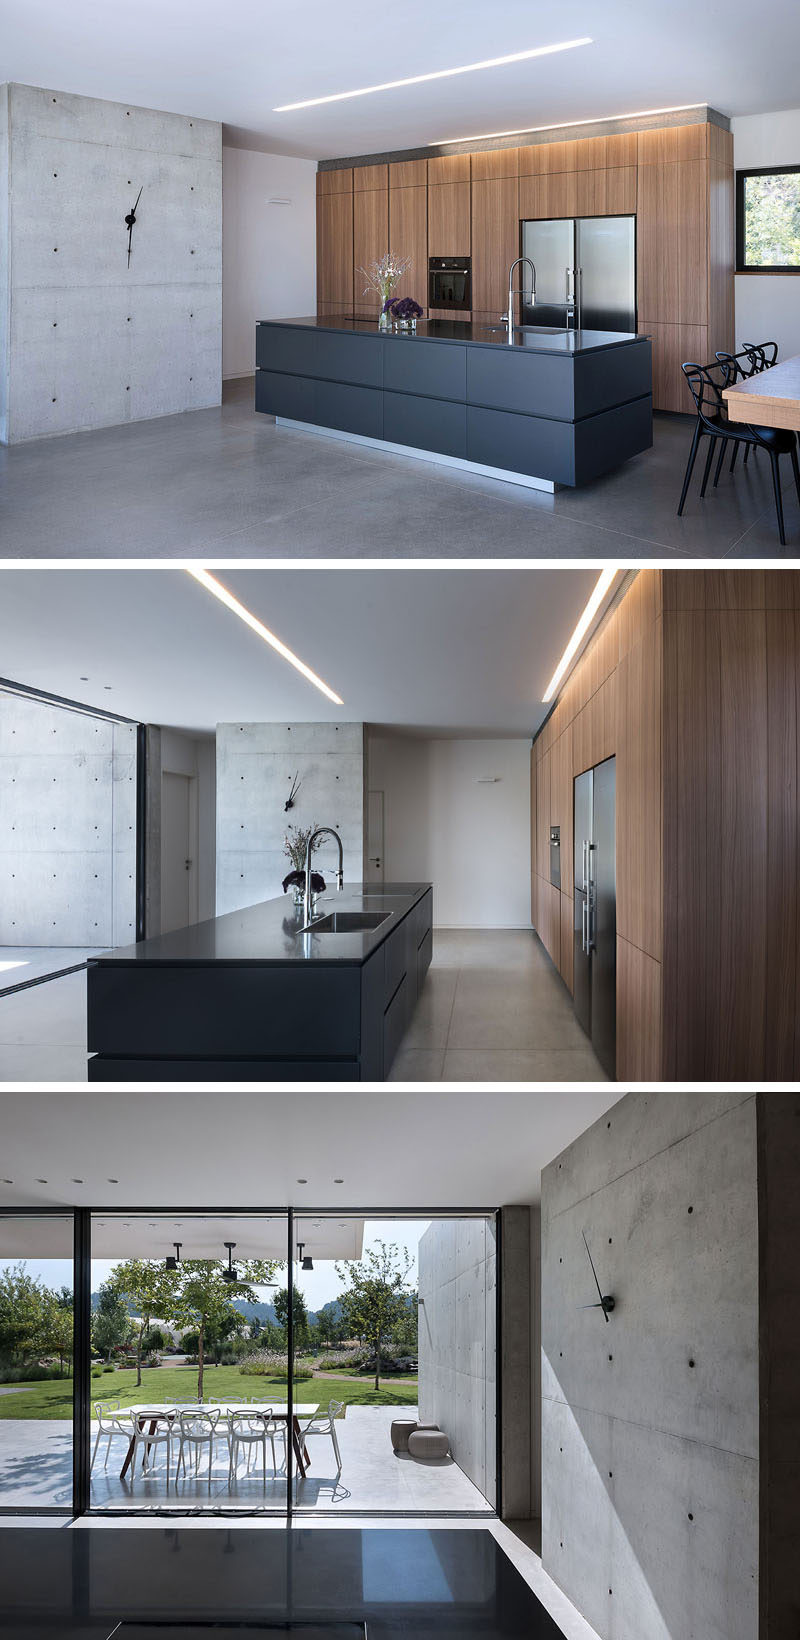 In this modern kitchen, minimalist wood cabinets line the wall, while a black island makes a statement. Next to the kitchen is a concrete wall adorned with a simple clock. #ModernKitchen #KitchenDesign